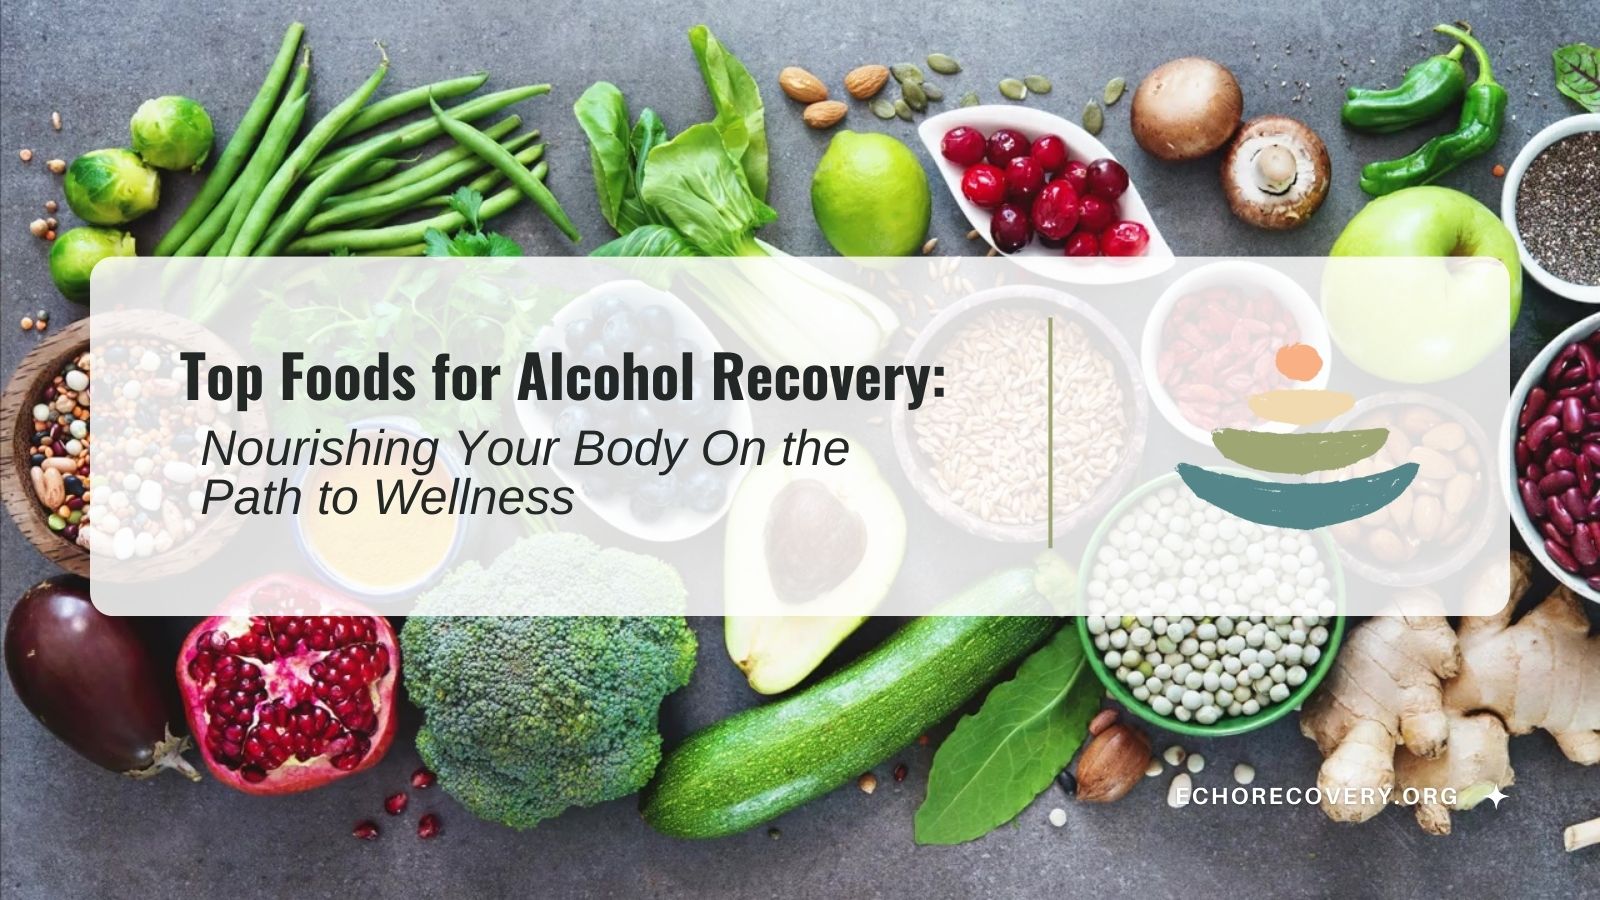 Food for Alcohol Recovery